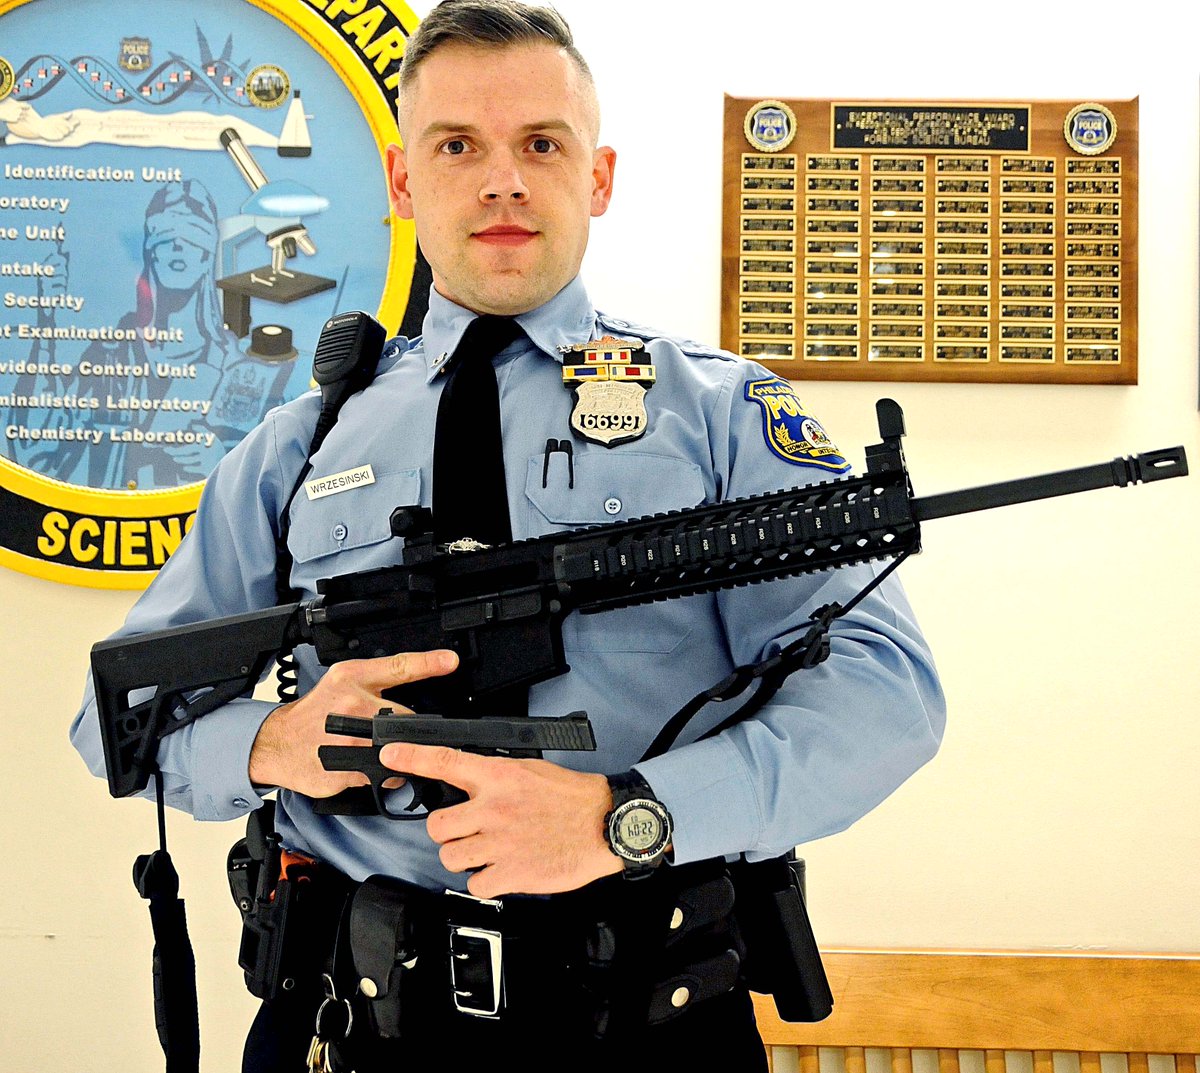 PHOTO: Officer Krzysztof Wrzesinski arrested a 12-year-old for having an AR-15 and his 19-year-old brother for possession of a handgun.